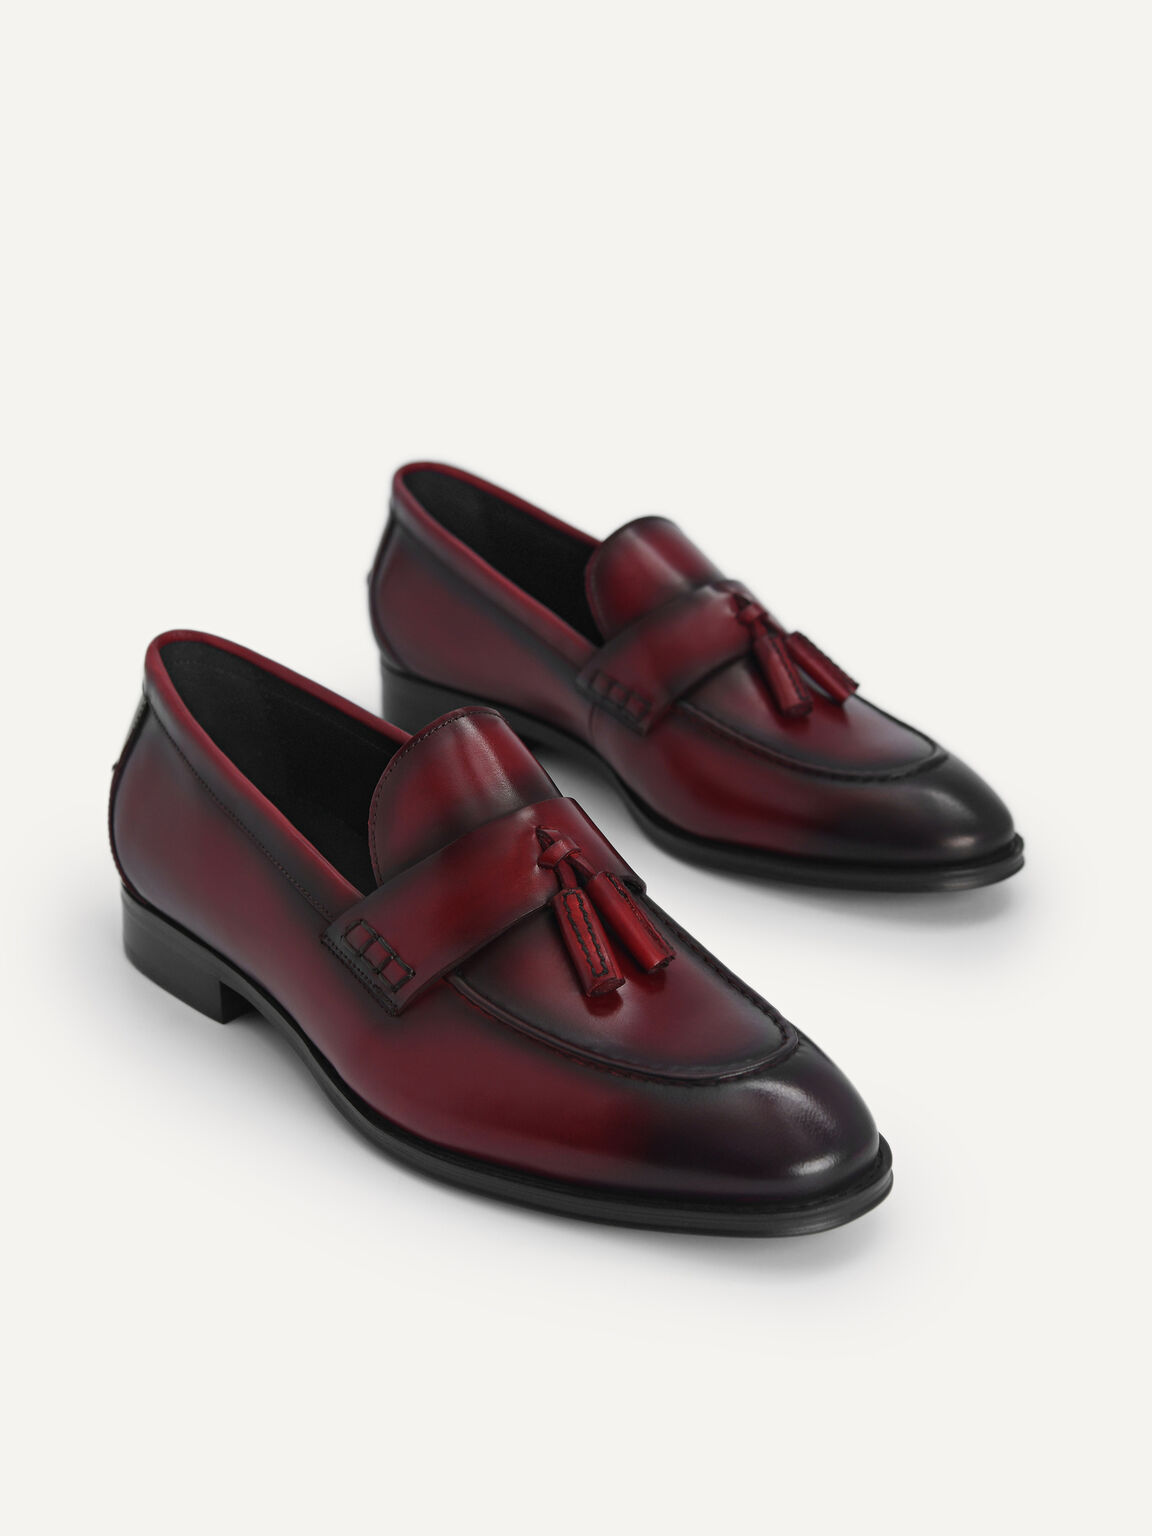 Burnished Leather Tasselled Loafers, Mahogany, hi-res